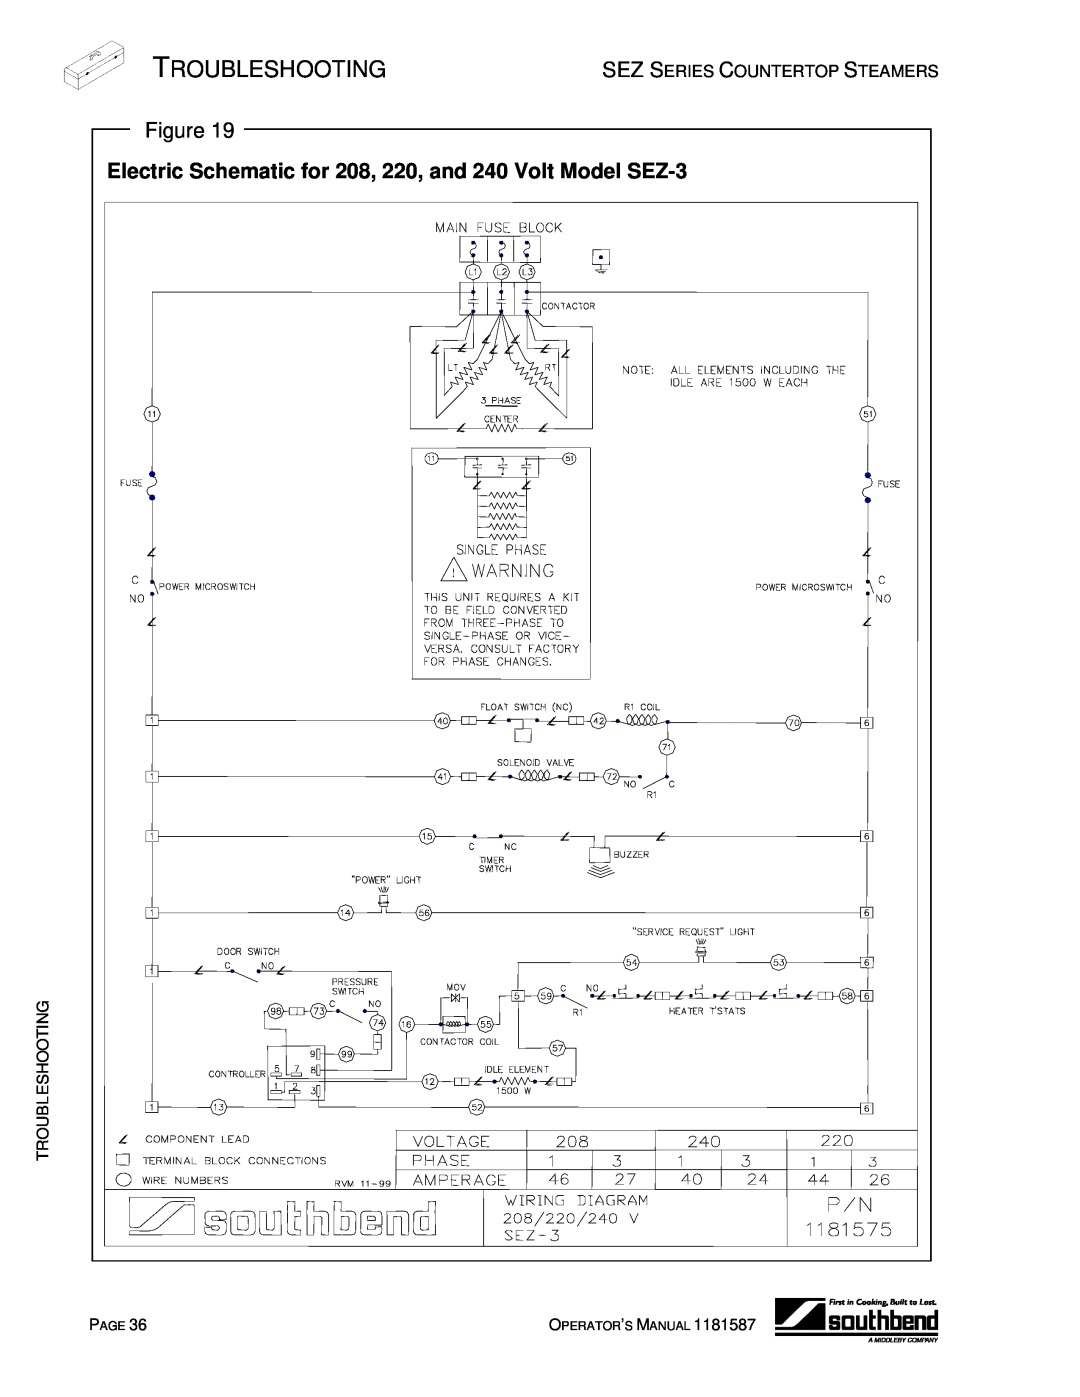 Southbend SEZ-5 manual Electric Schematic for 208, 220, and 240 Volt Model SEZ-3, Troubleshooting 